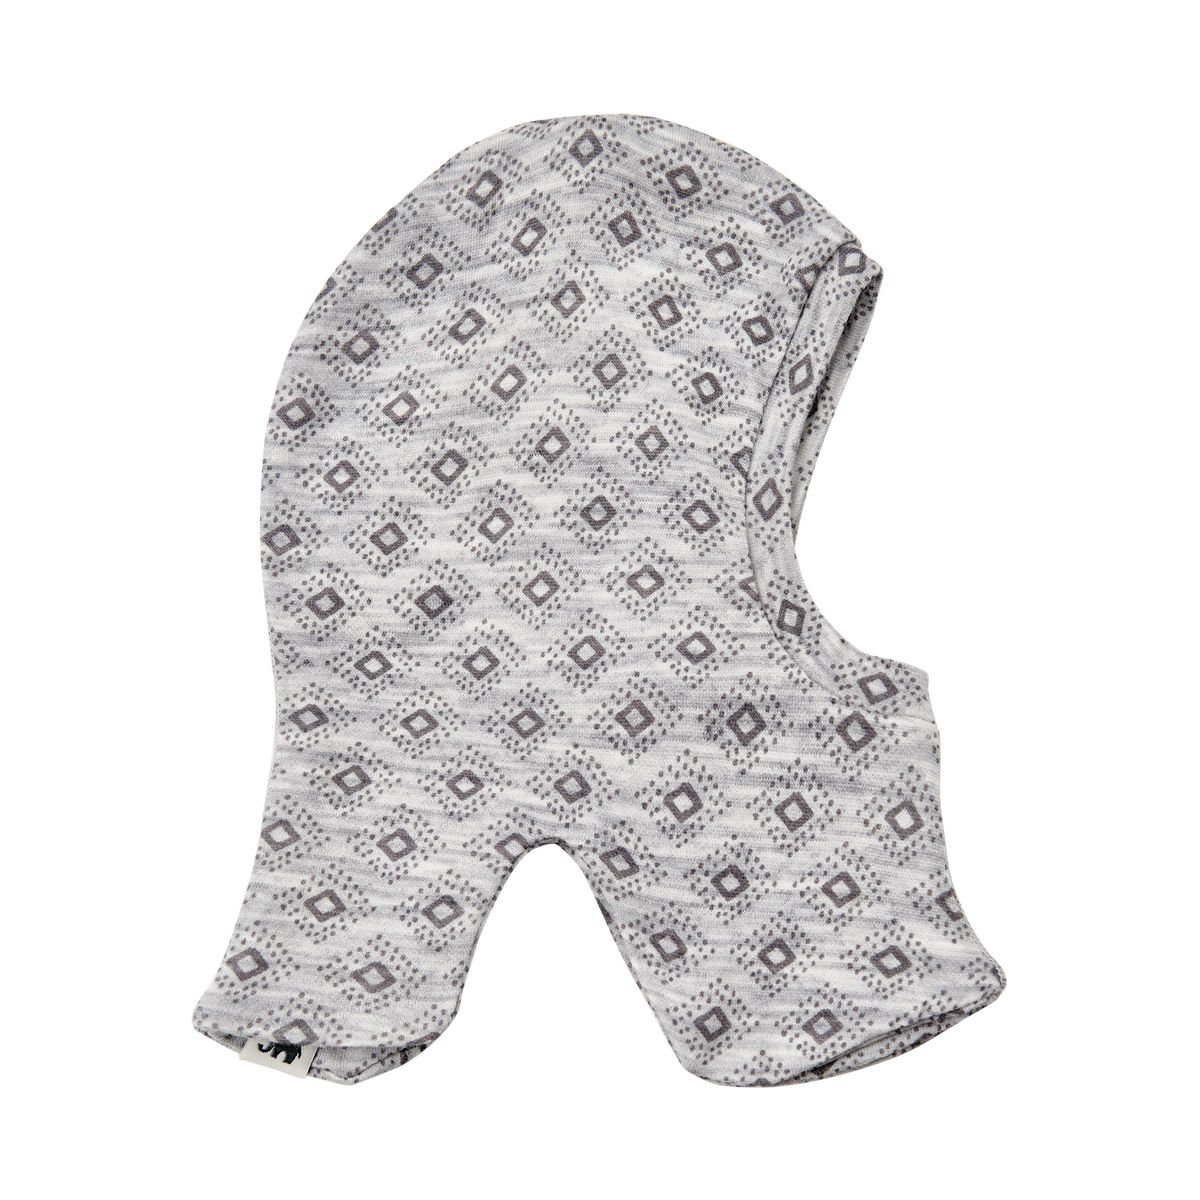 CelaVi luxury kids base layer top with merino wool outer layer, and smooth comfortable bamboo inner layer in grey print